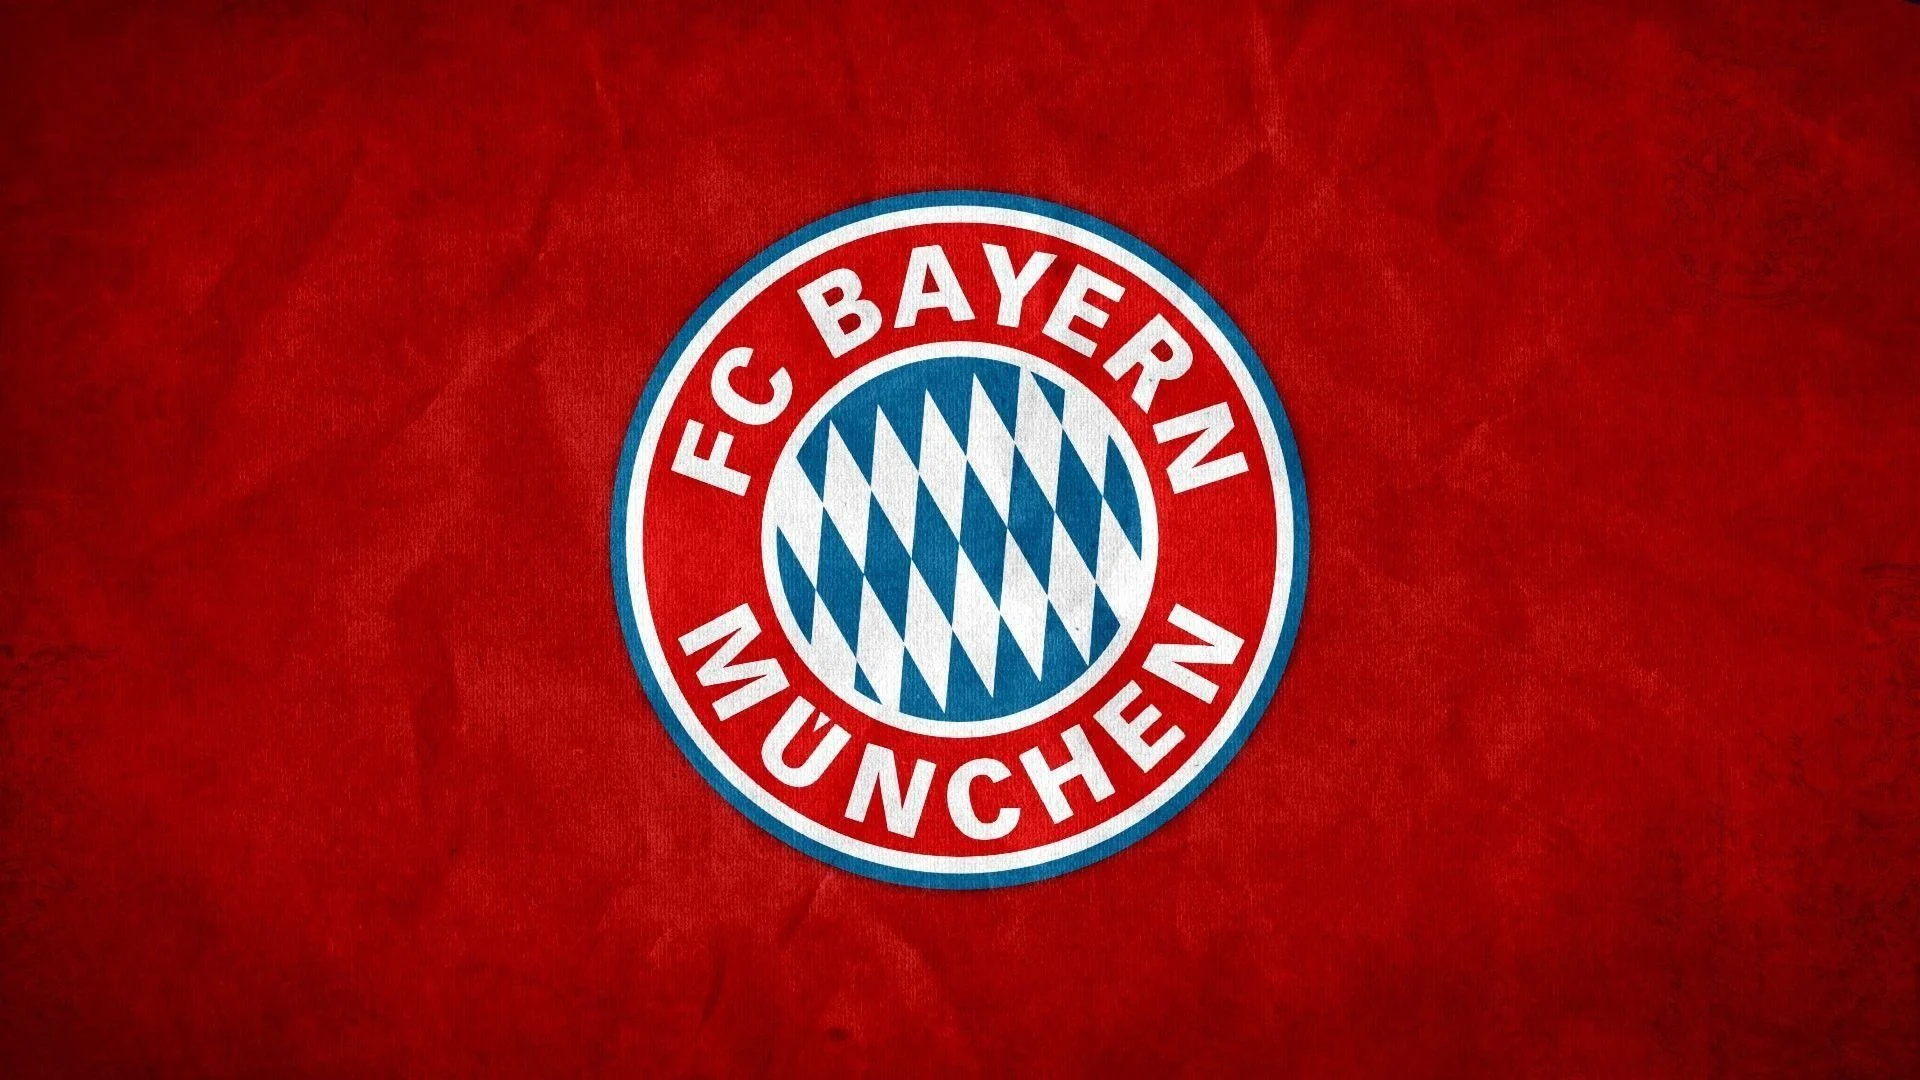 Bayern Munchen FC: The Bundesliga record champions, lifting the Meisterschale on an impressive 25 occasions. 1920x1080 Full HD Background.